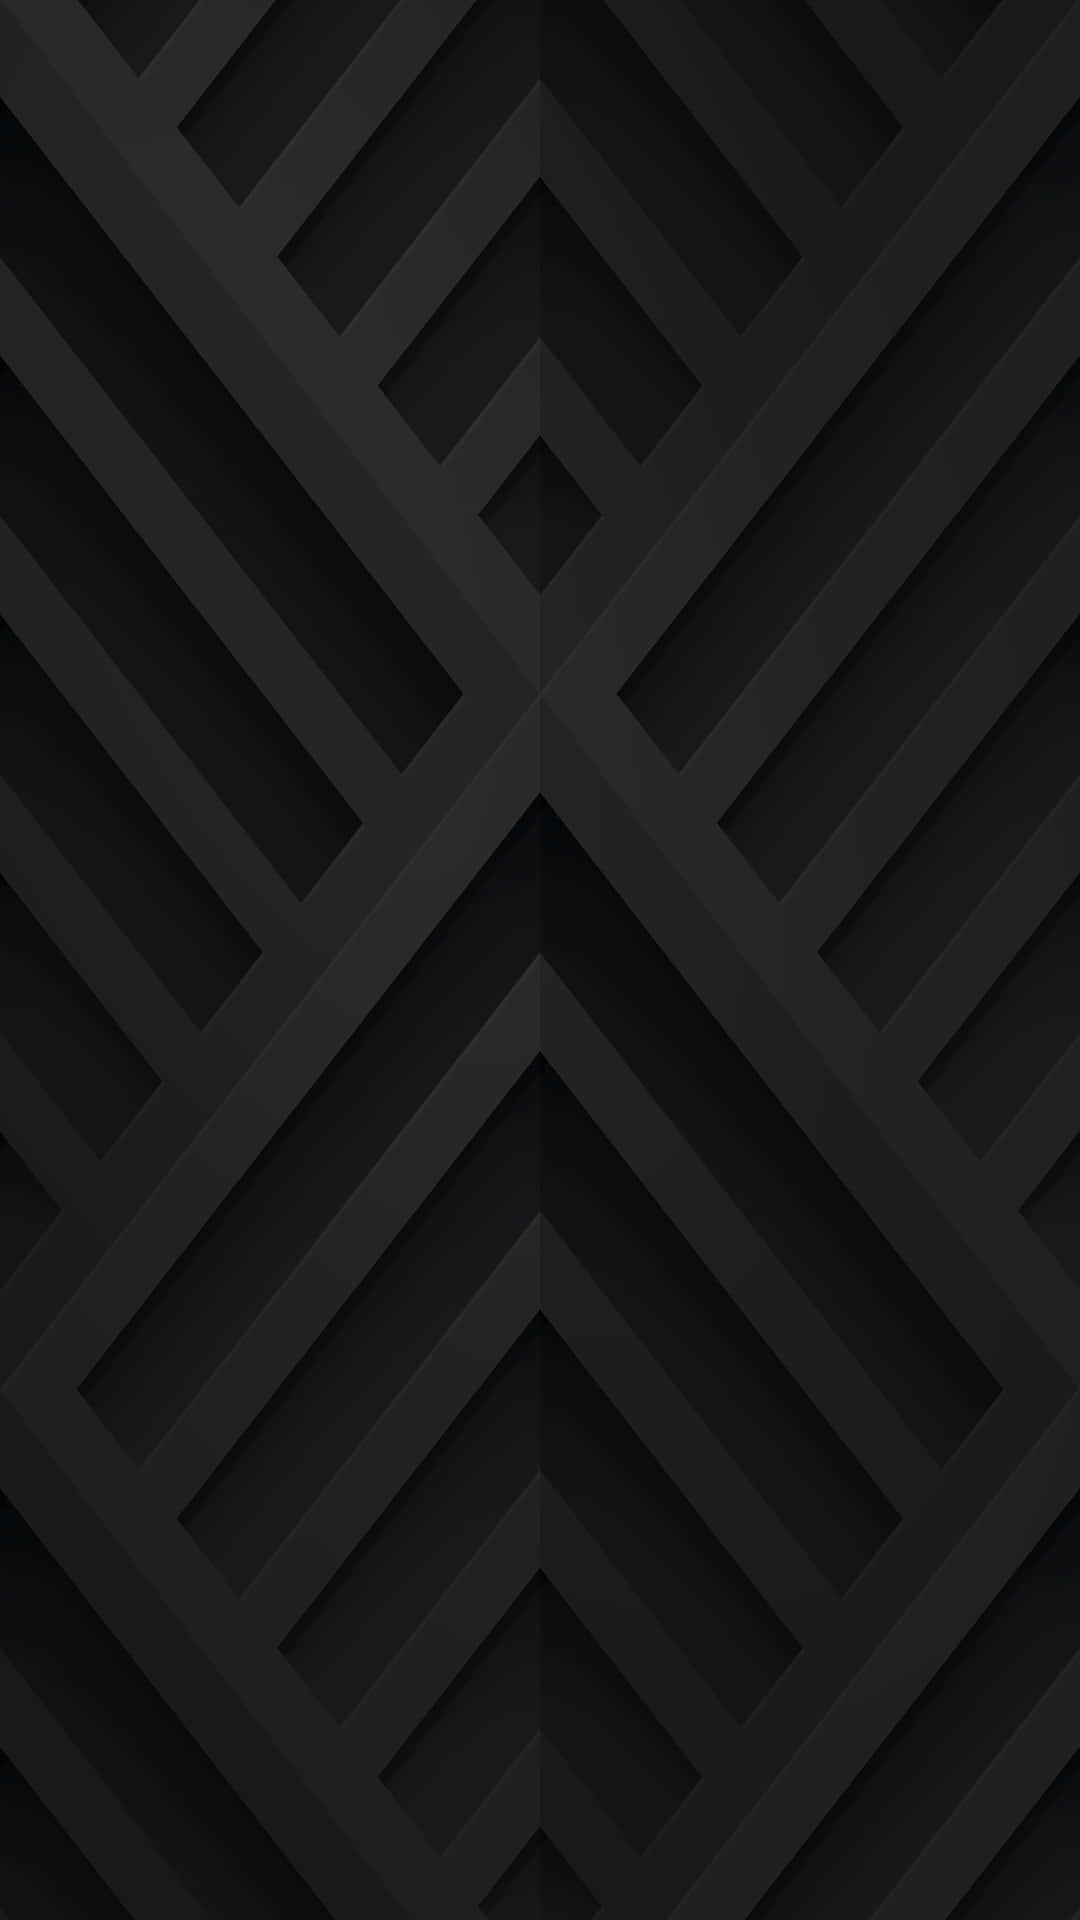 Add some Art Deco style to your phone with this stunning Iphone Wallpaper